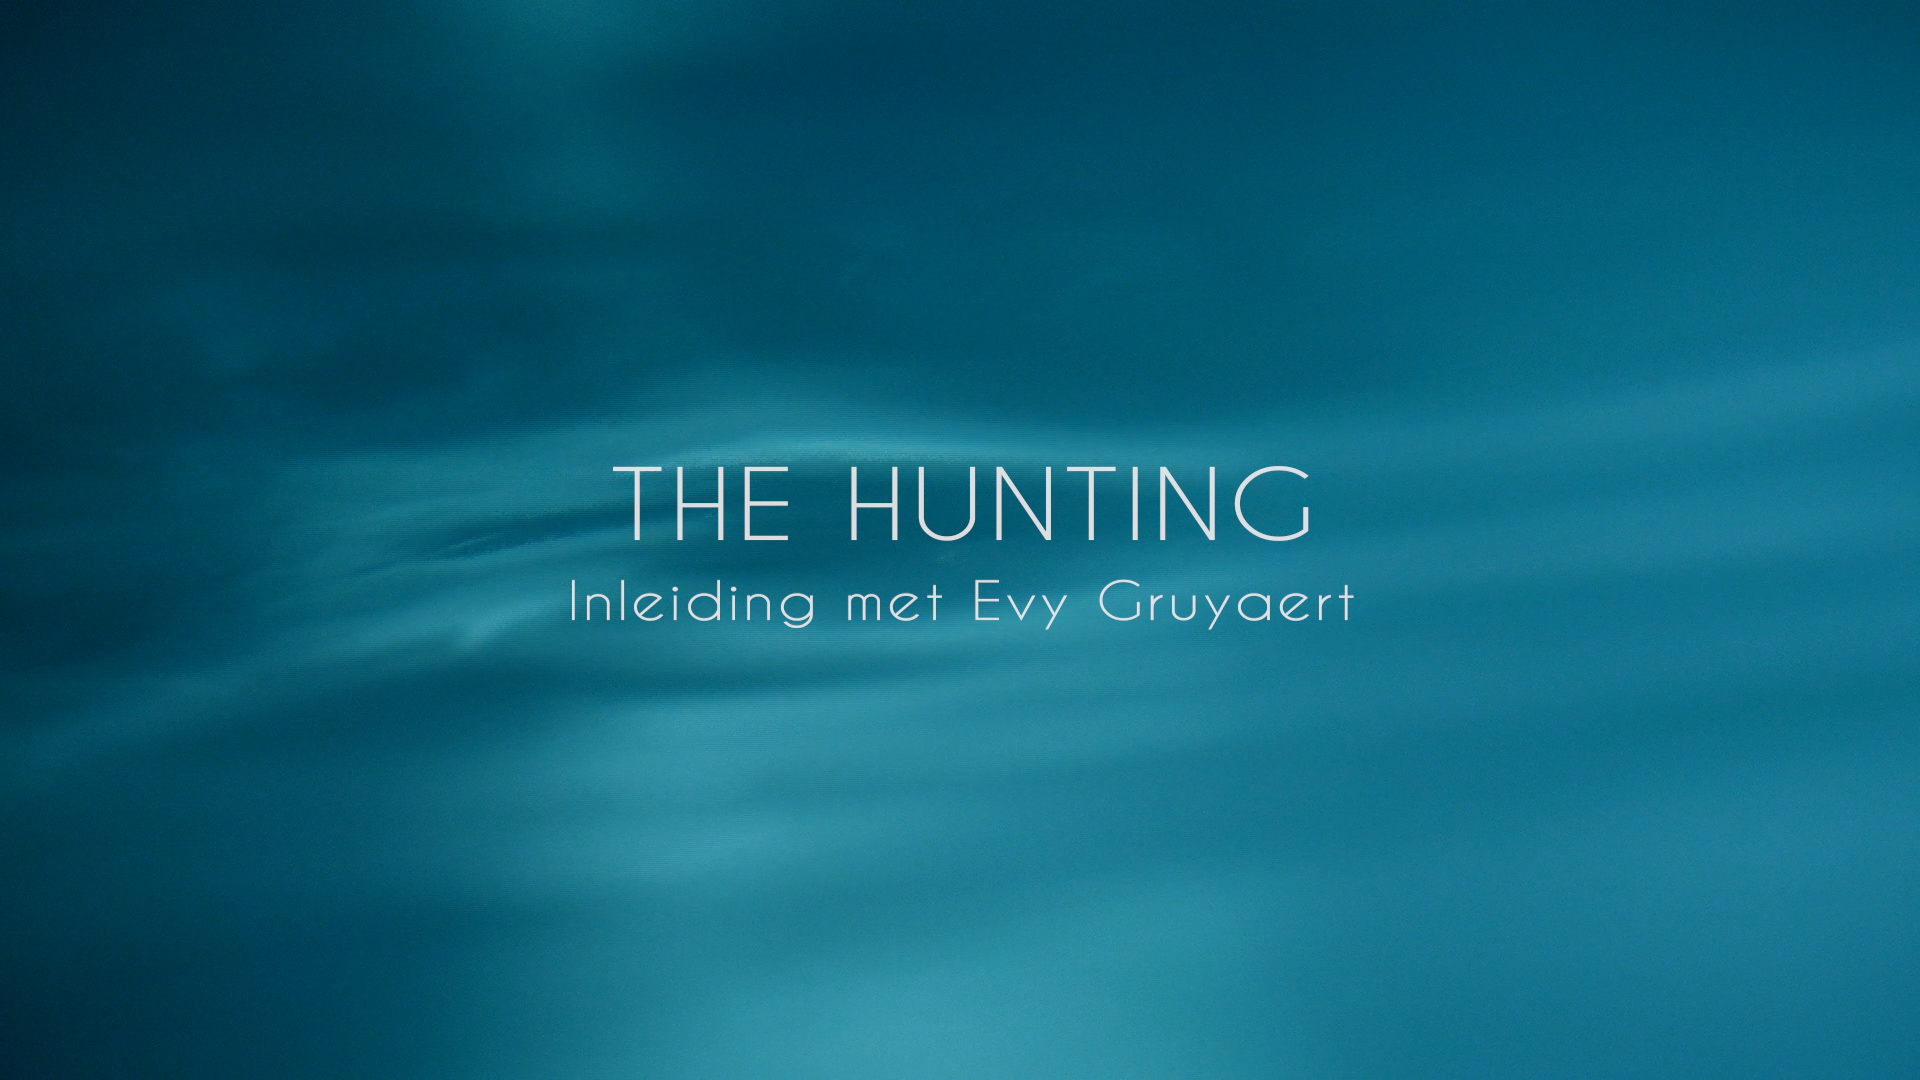 THE HUNTING